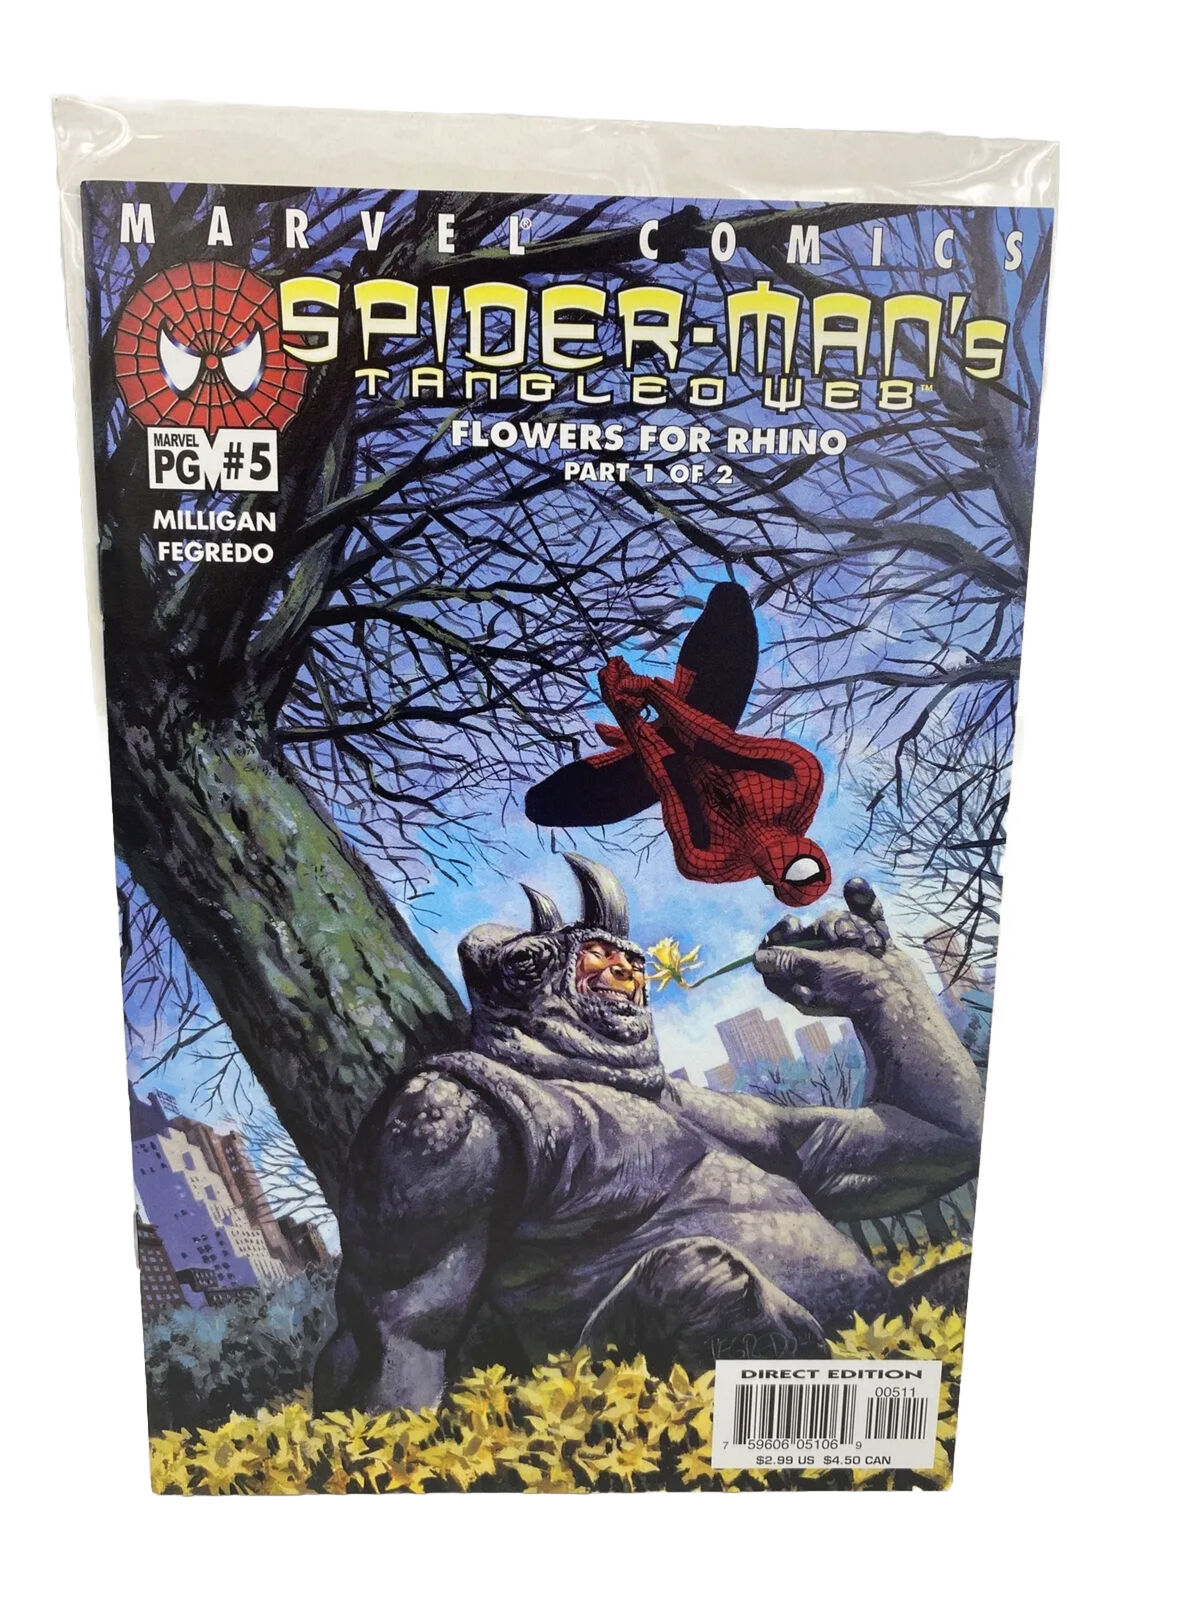 SPIDER-MAN’S “TANGLED WEB” FLOWERS FOR RHINO COMIC Part 1 (#5) Mint